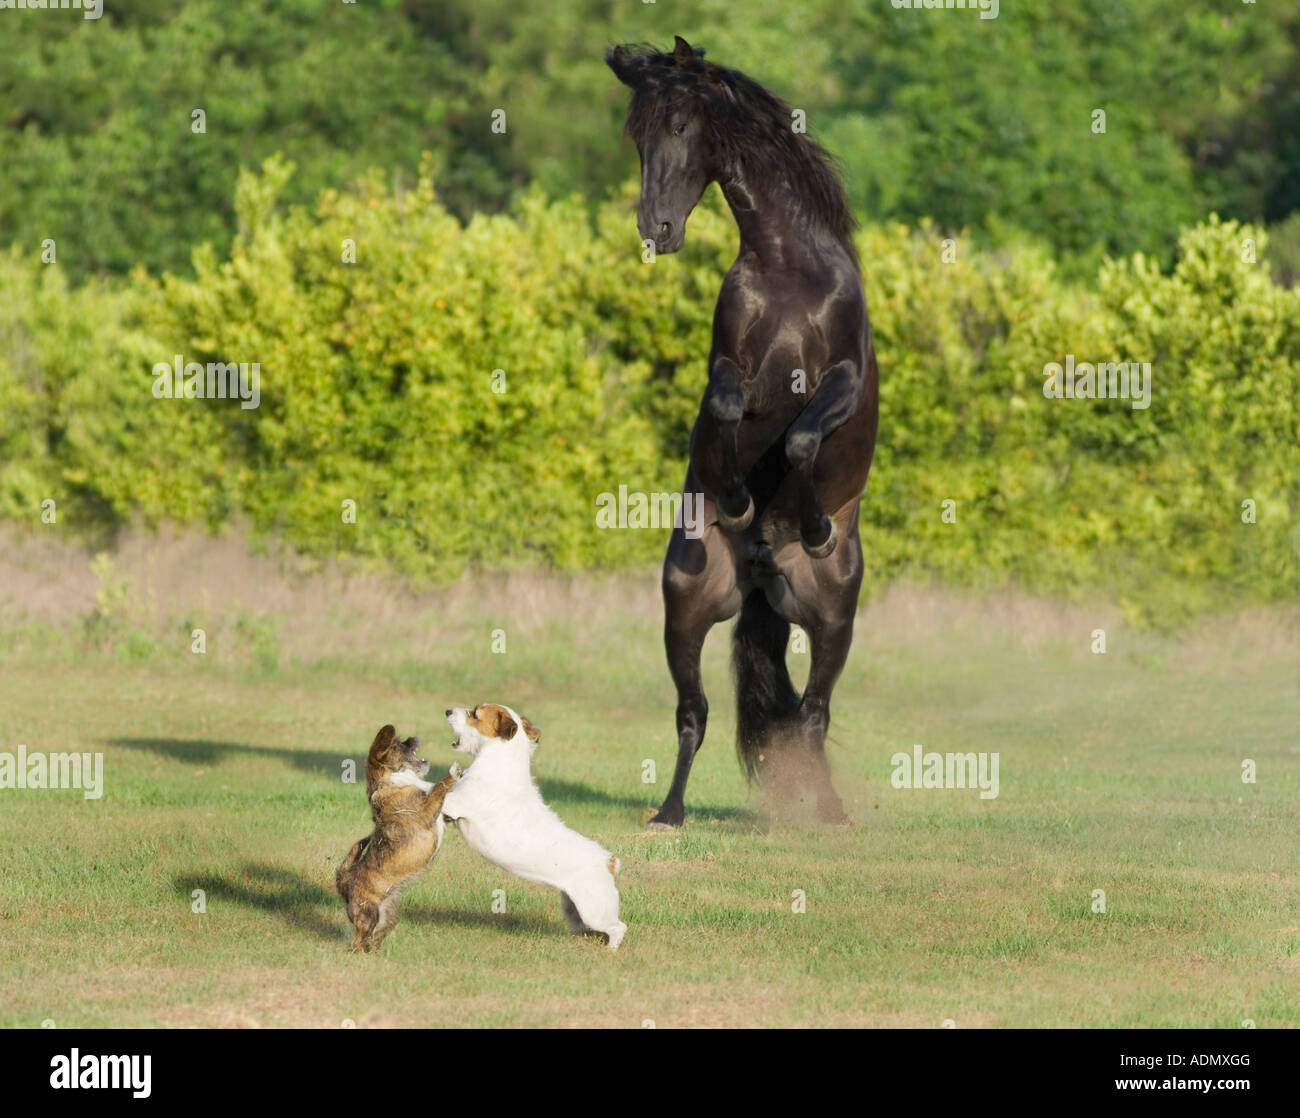 Black Andalusian stallion rears up in paddock while two small dogs play near him Stock Photo